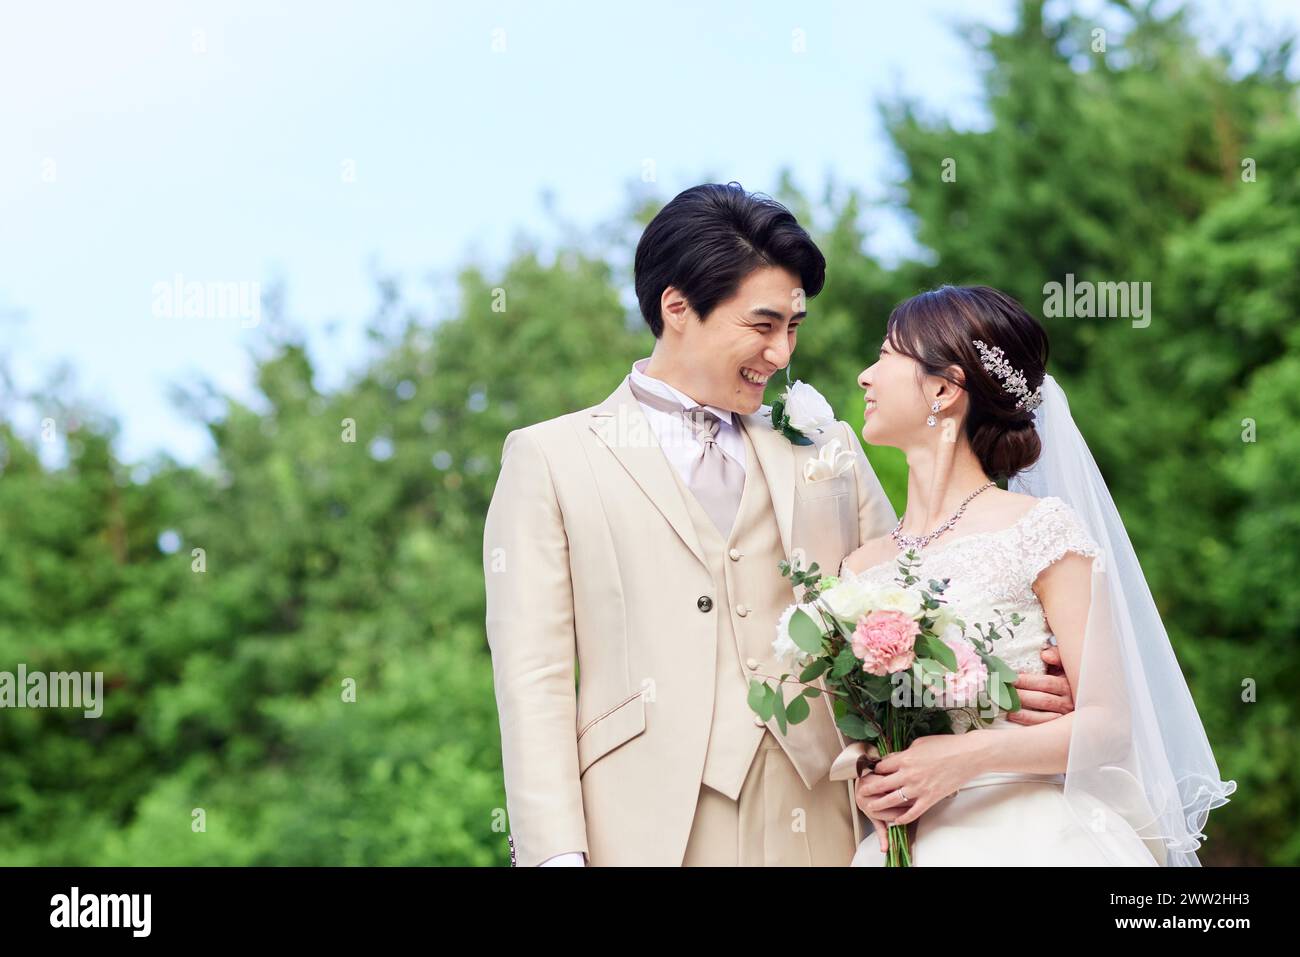 A newly married couple standing in the grass Stock Photo